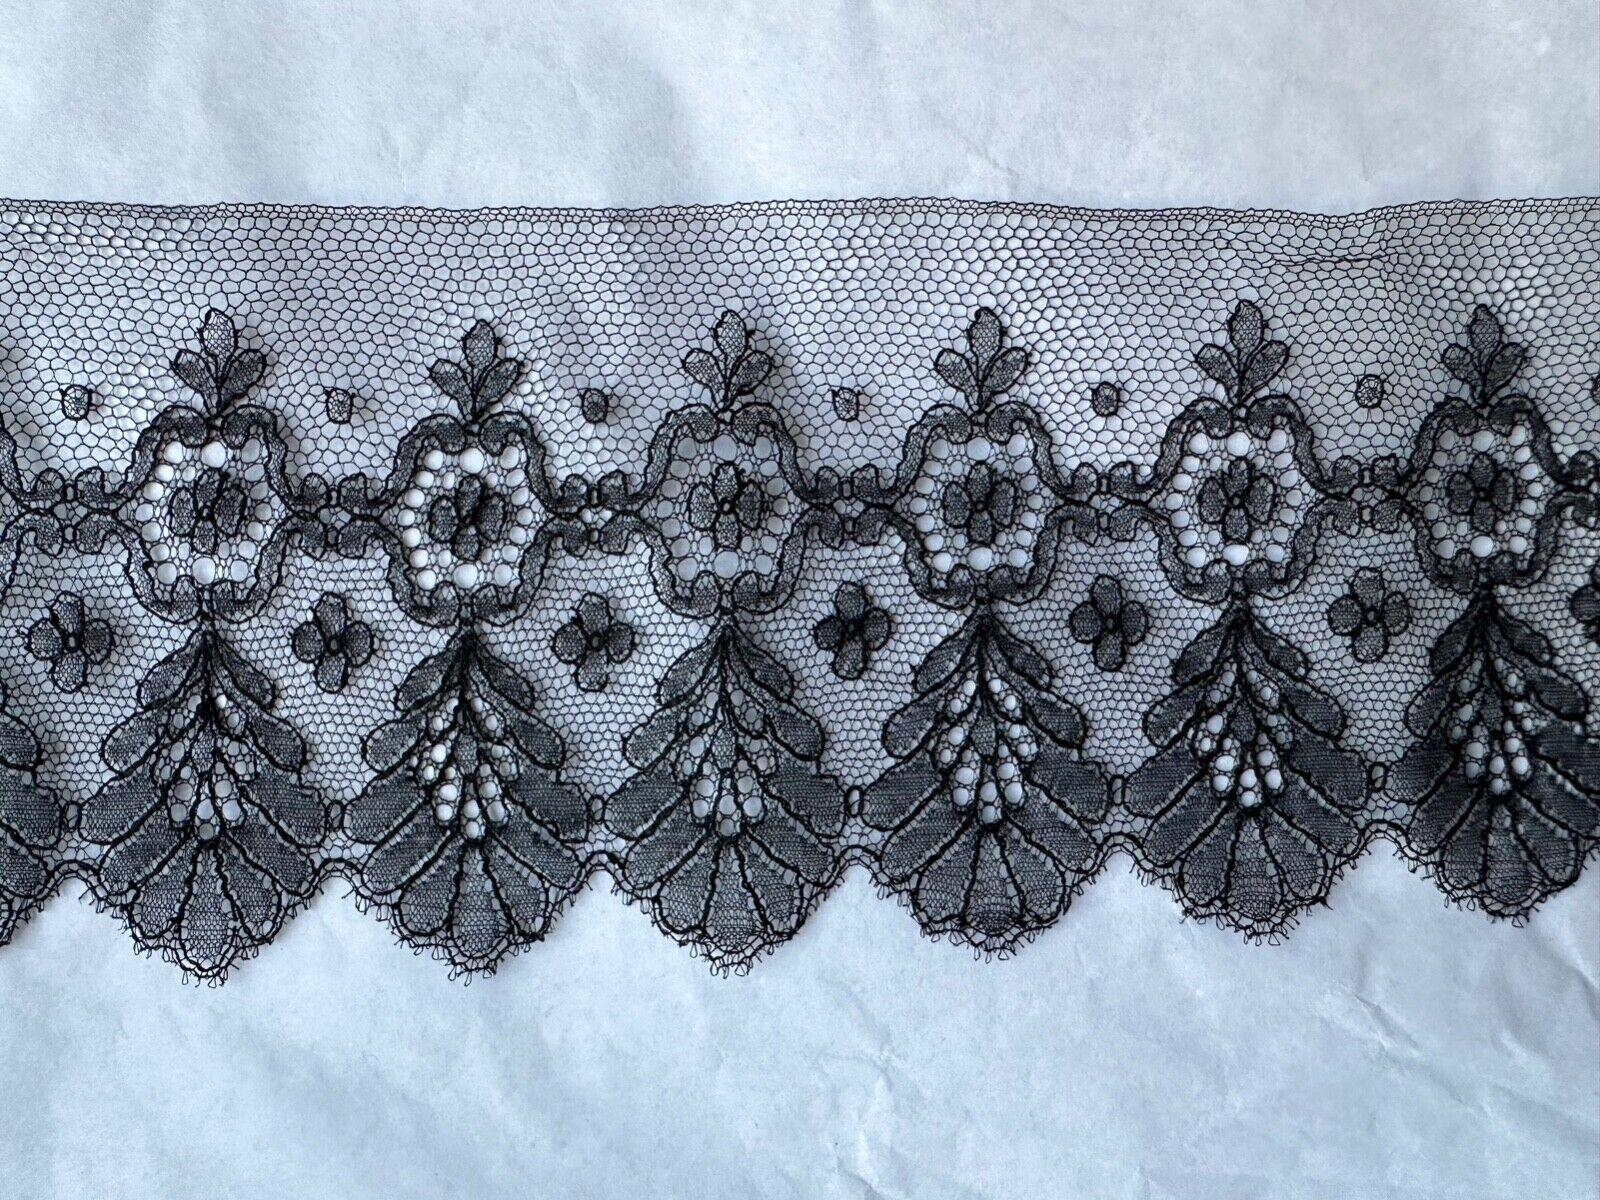 Stunning Antique Handmade CHANTILLY LACE Edging 200cm by 9.5cm